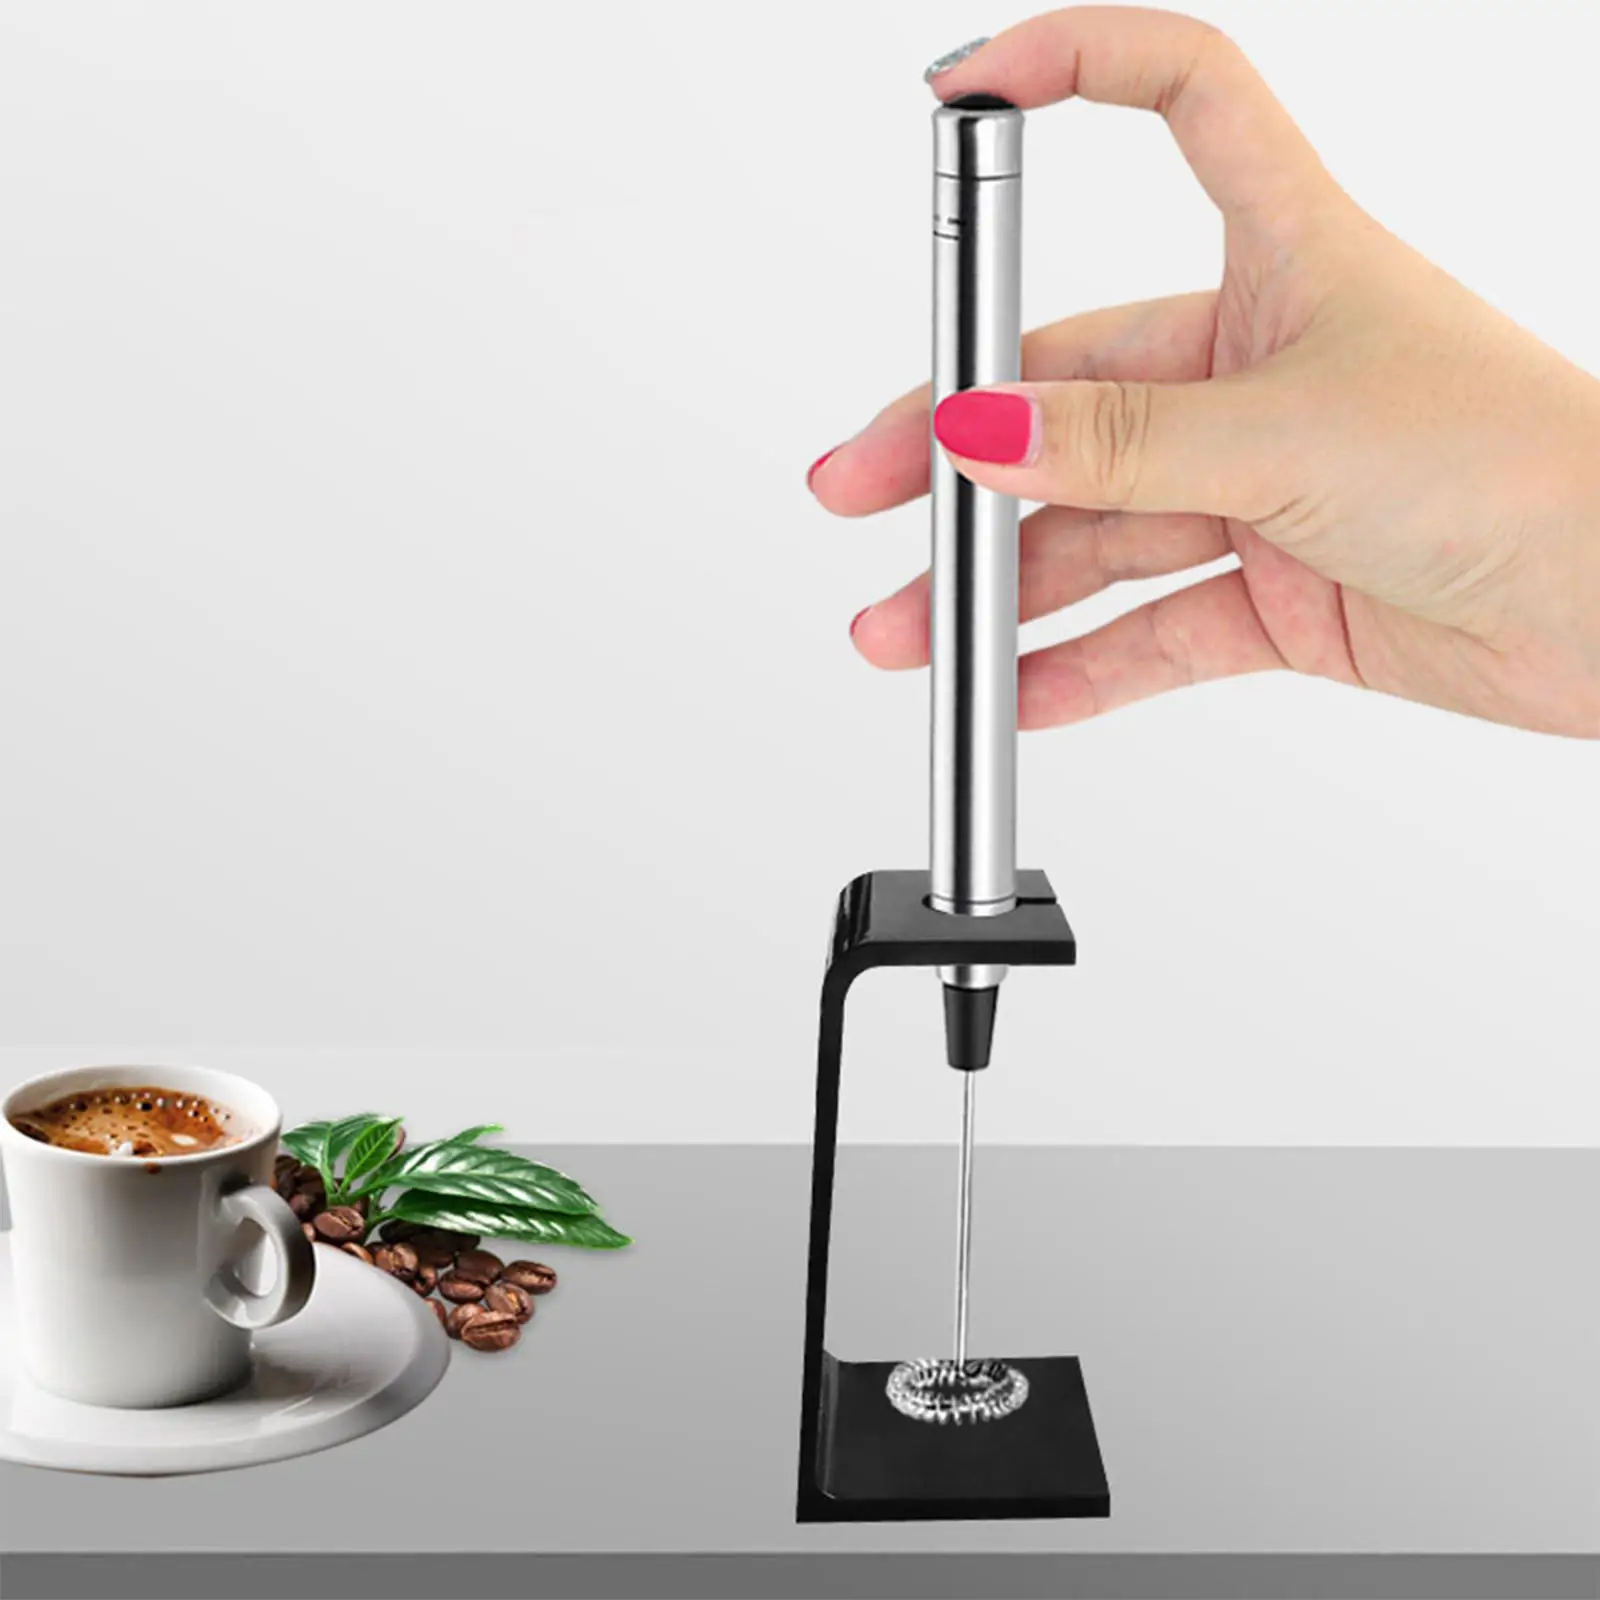 Electric Milk Frother with Stand Mini Stirrer Egg Beater Battery Operated Coffee Frother for Cappuccino Matcha